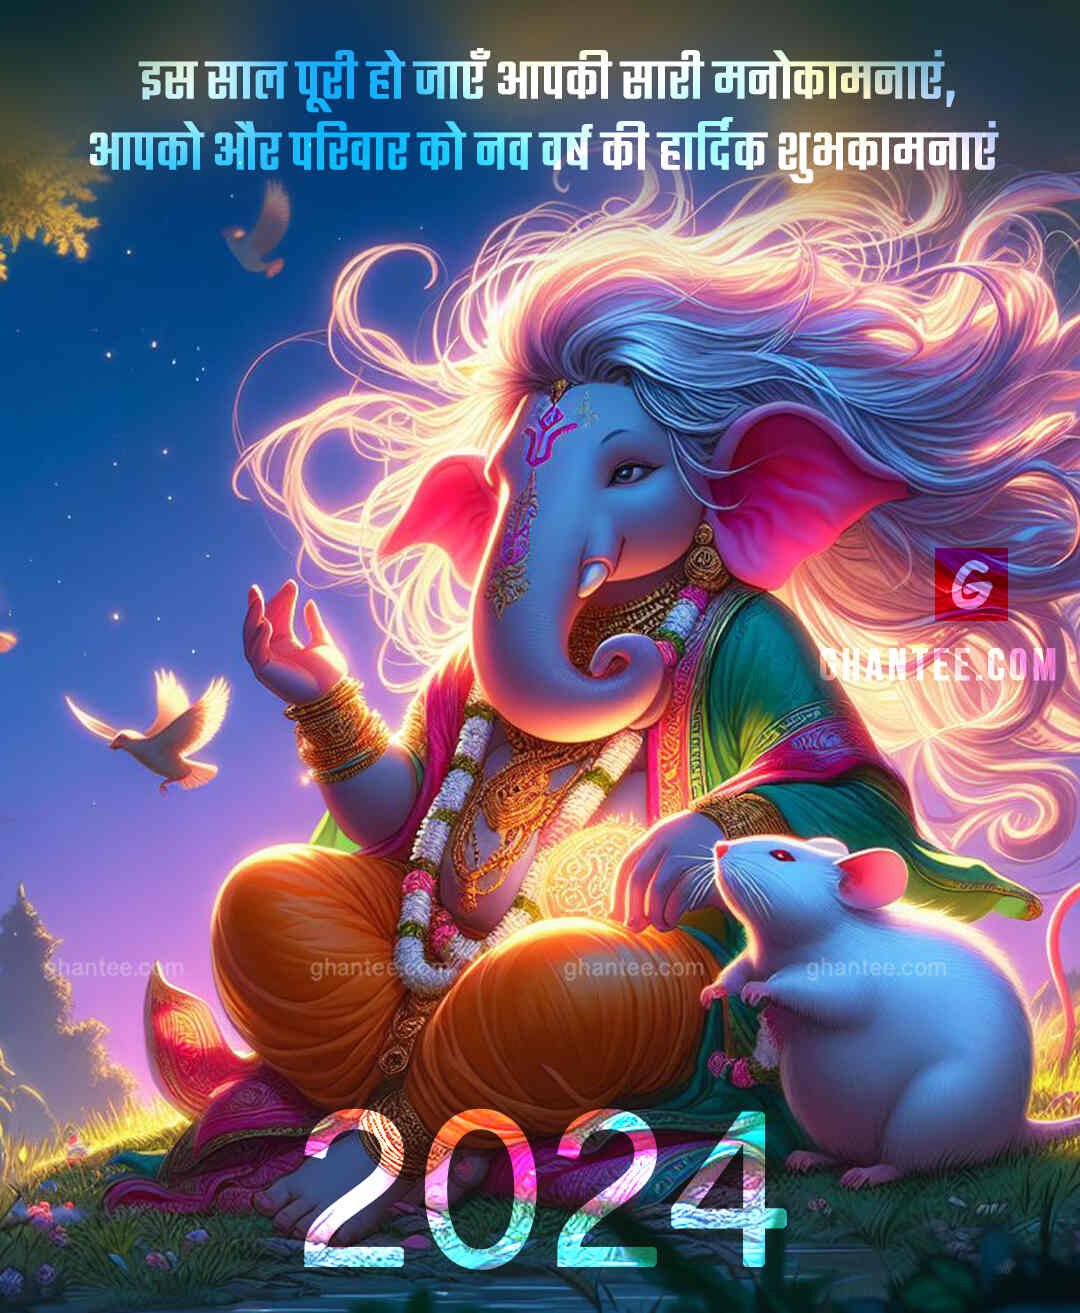 enter into a happy new year with ganesha